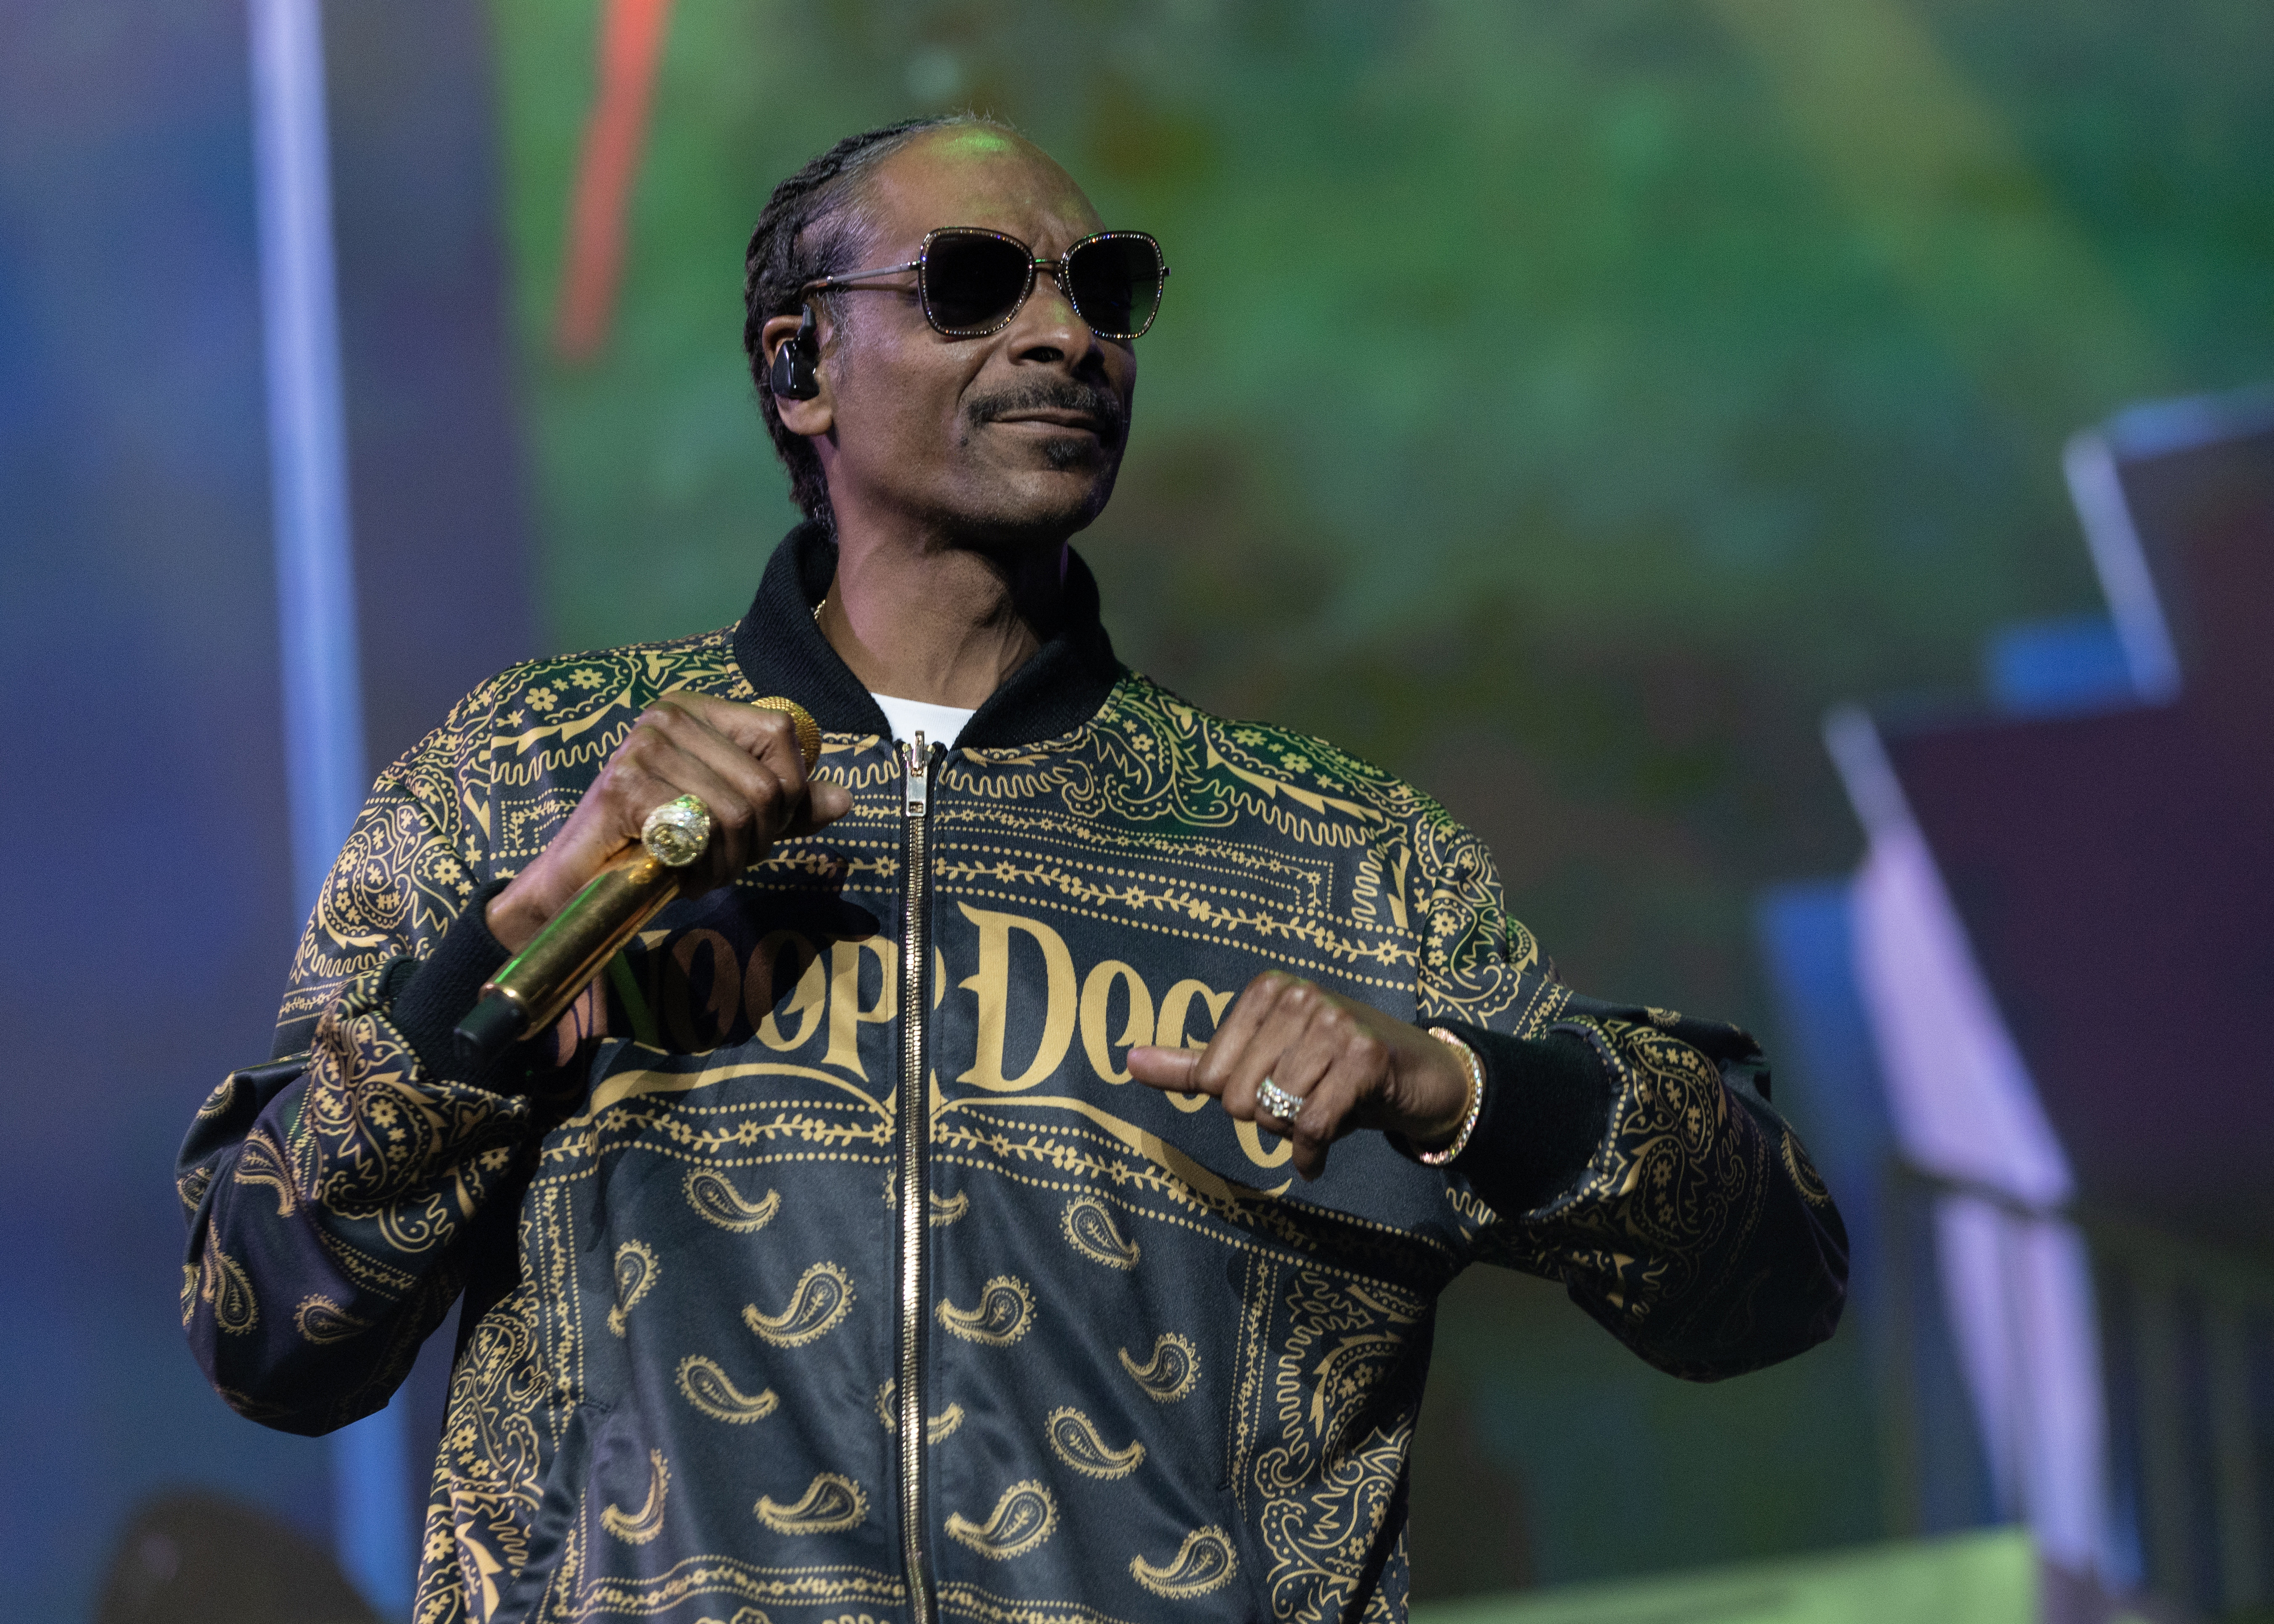 Snoop Dogg performs in a black and gold jacket